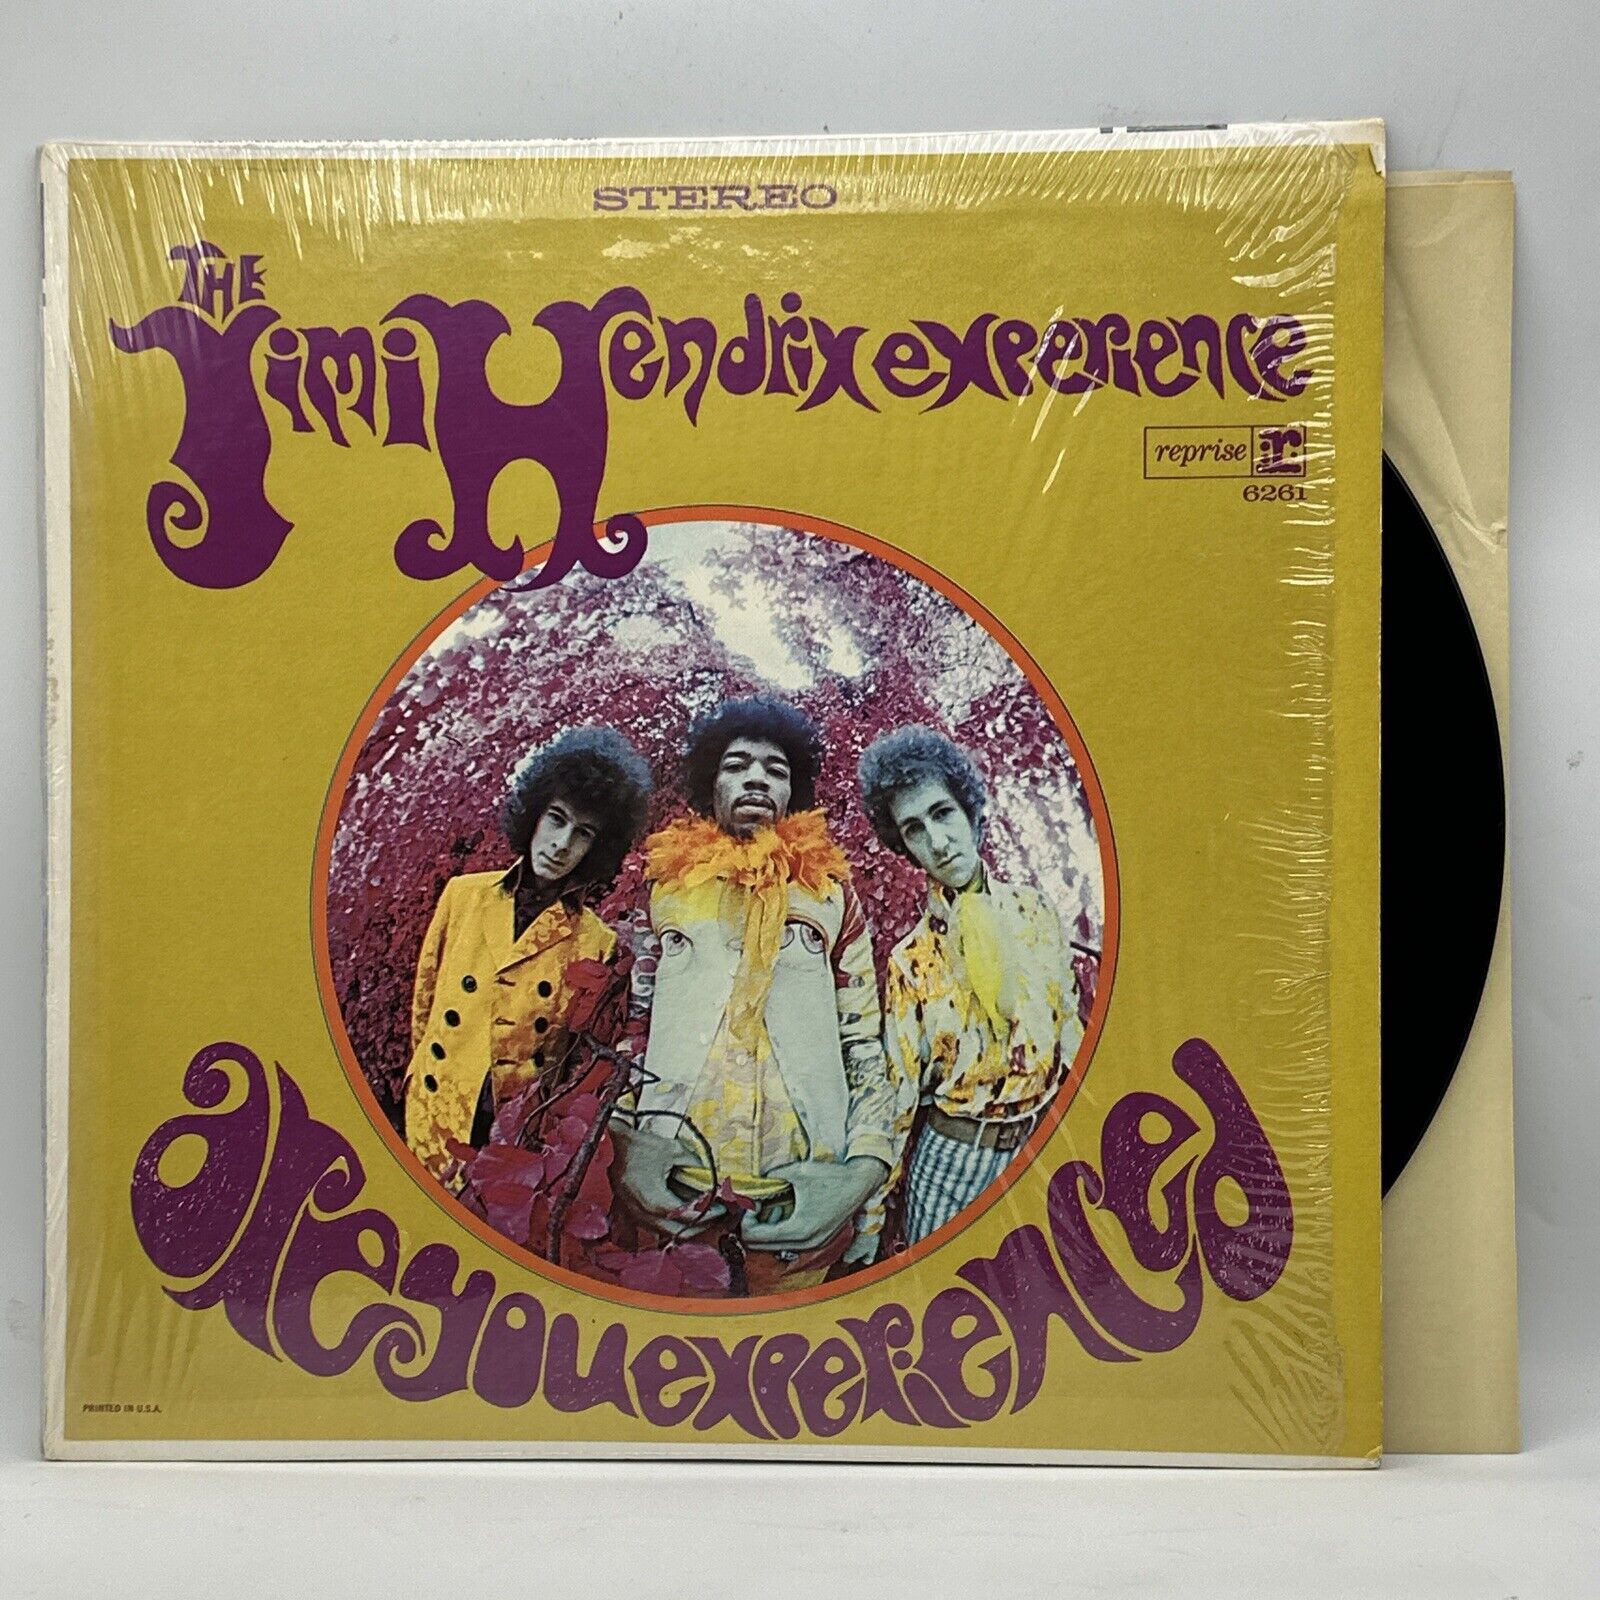 Jimi Hendrix Experience - Are You Experienced - 1968 US Stereo Press (EX/NM)